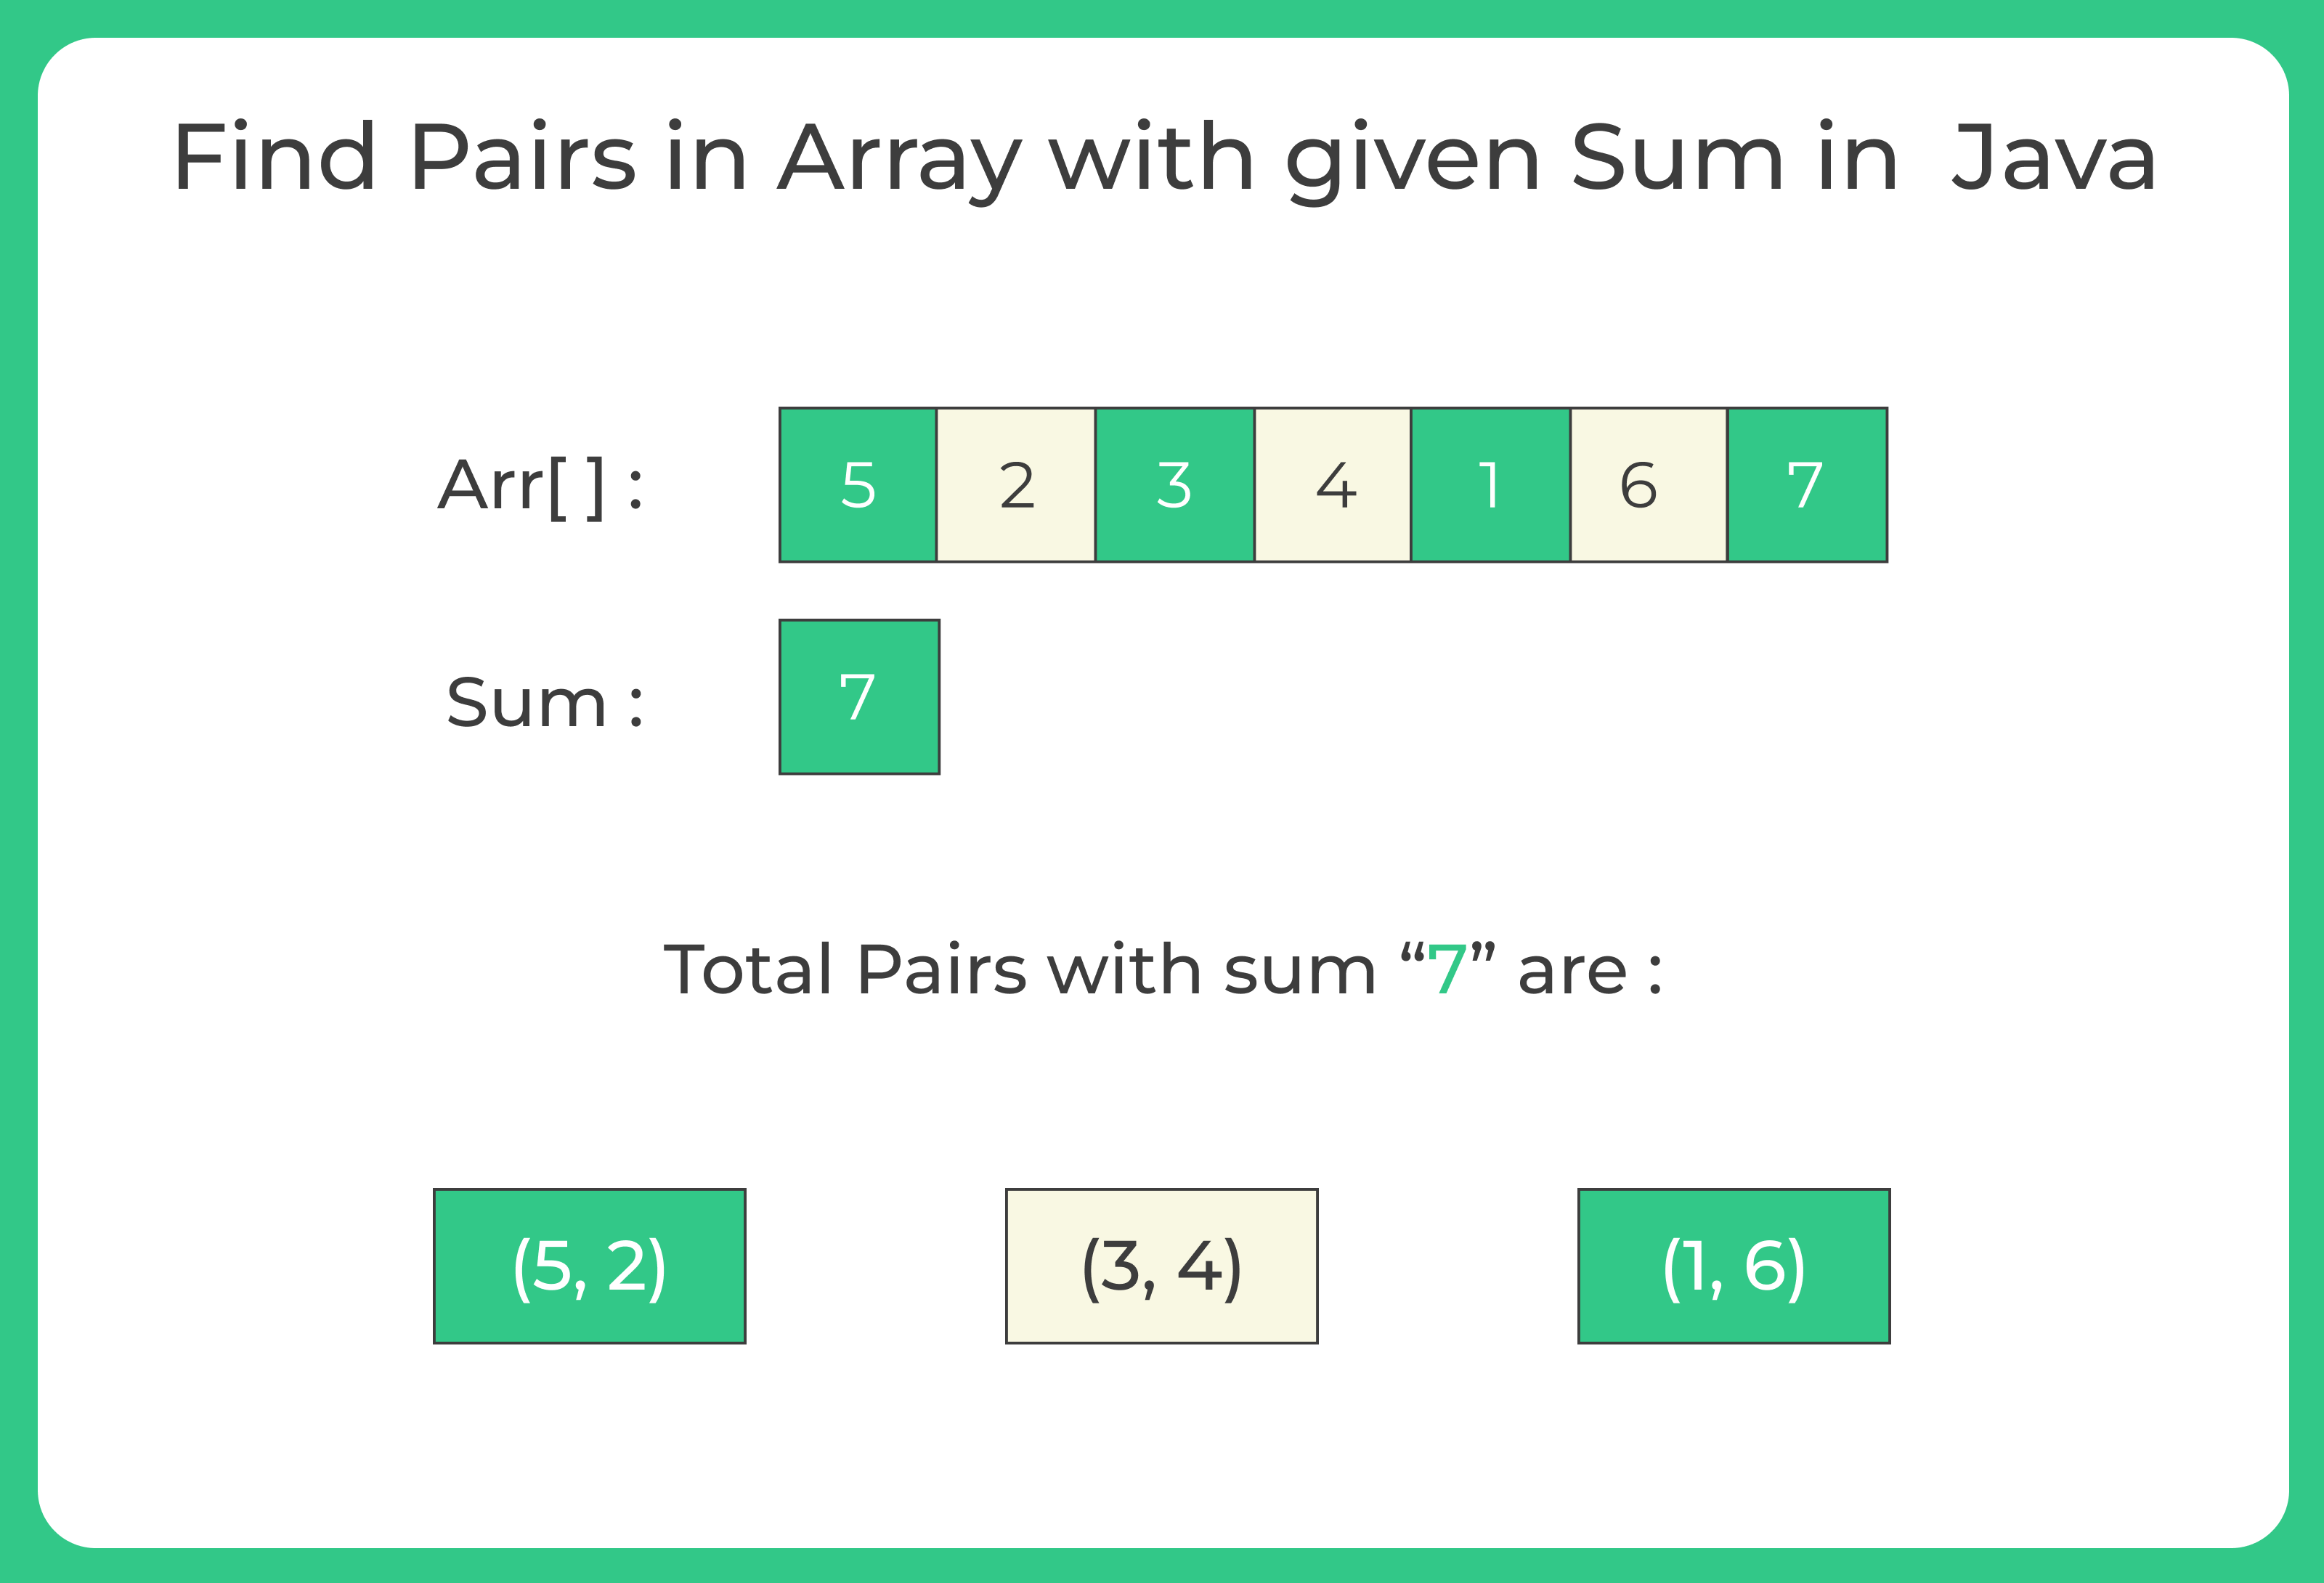 Find-Pairs-in-Array-with-given-Sum-in-Java